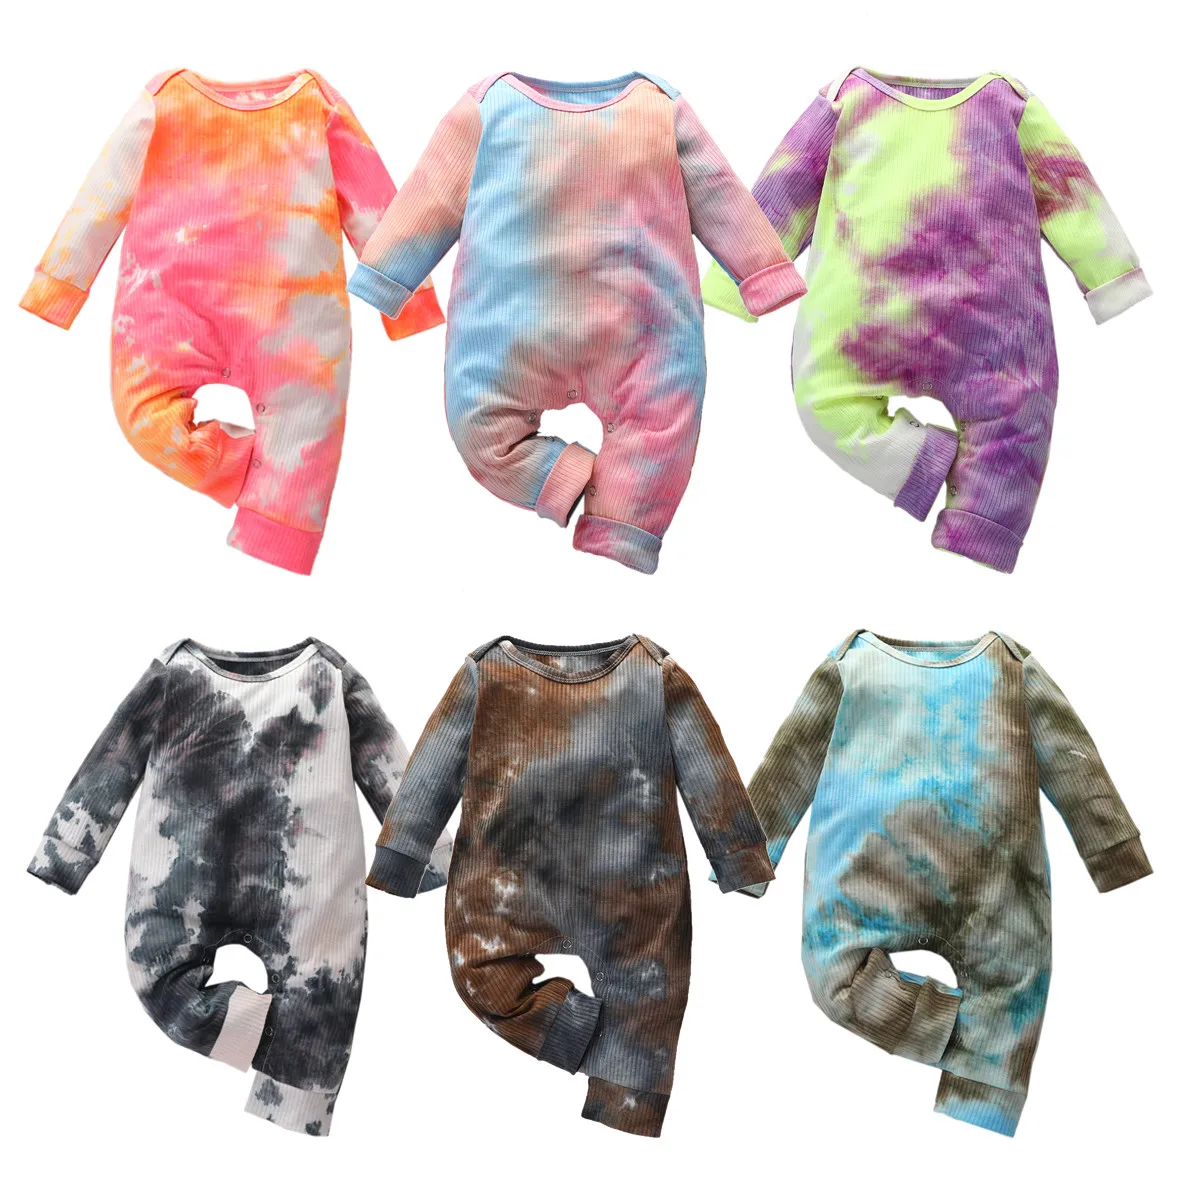 

0-24M Newborn Baby Girls Tie dye Romper Long SleeveClorful Jumpsuits Spring Autumn Clothing Ribbed Outfits